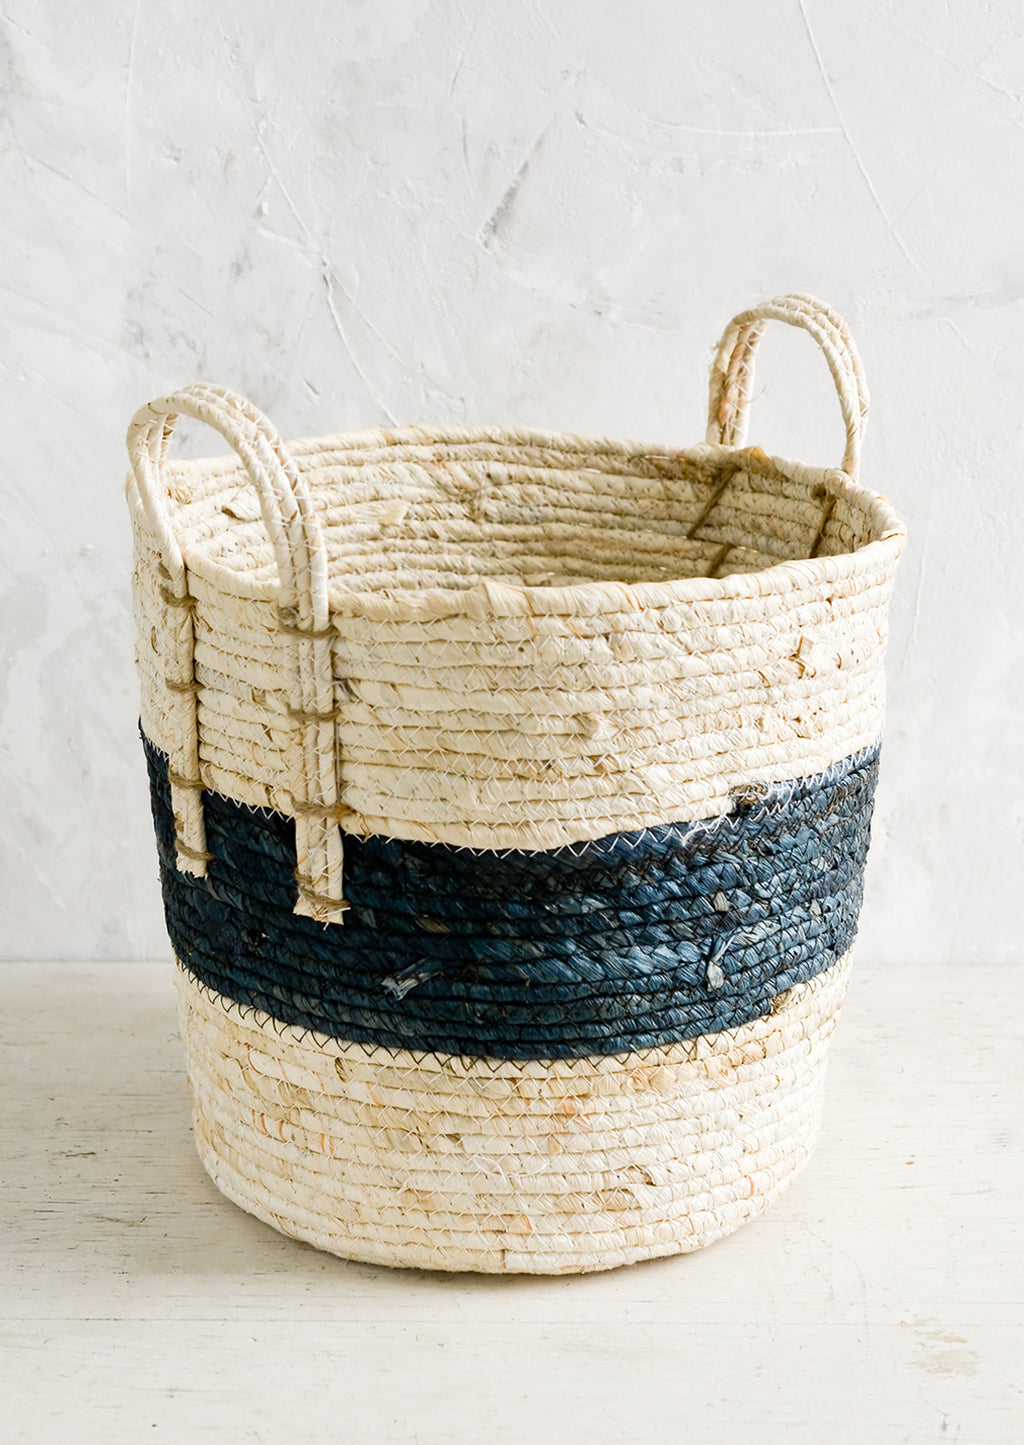 1: A storage basket with two top handles, woven from natural fiber.